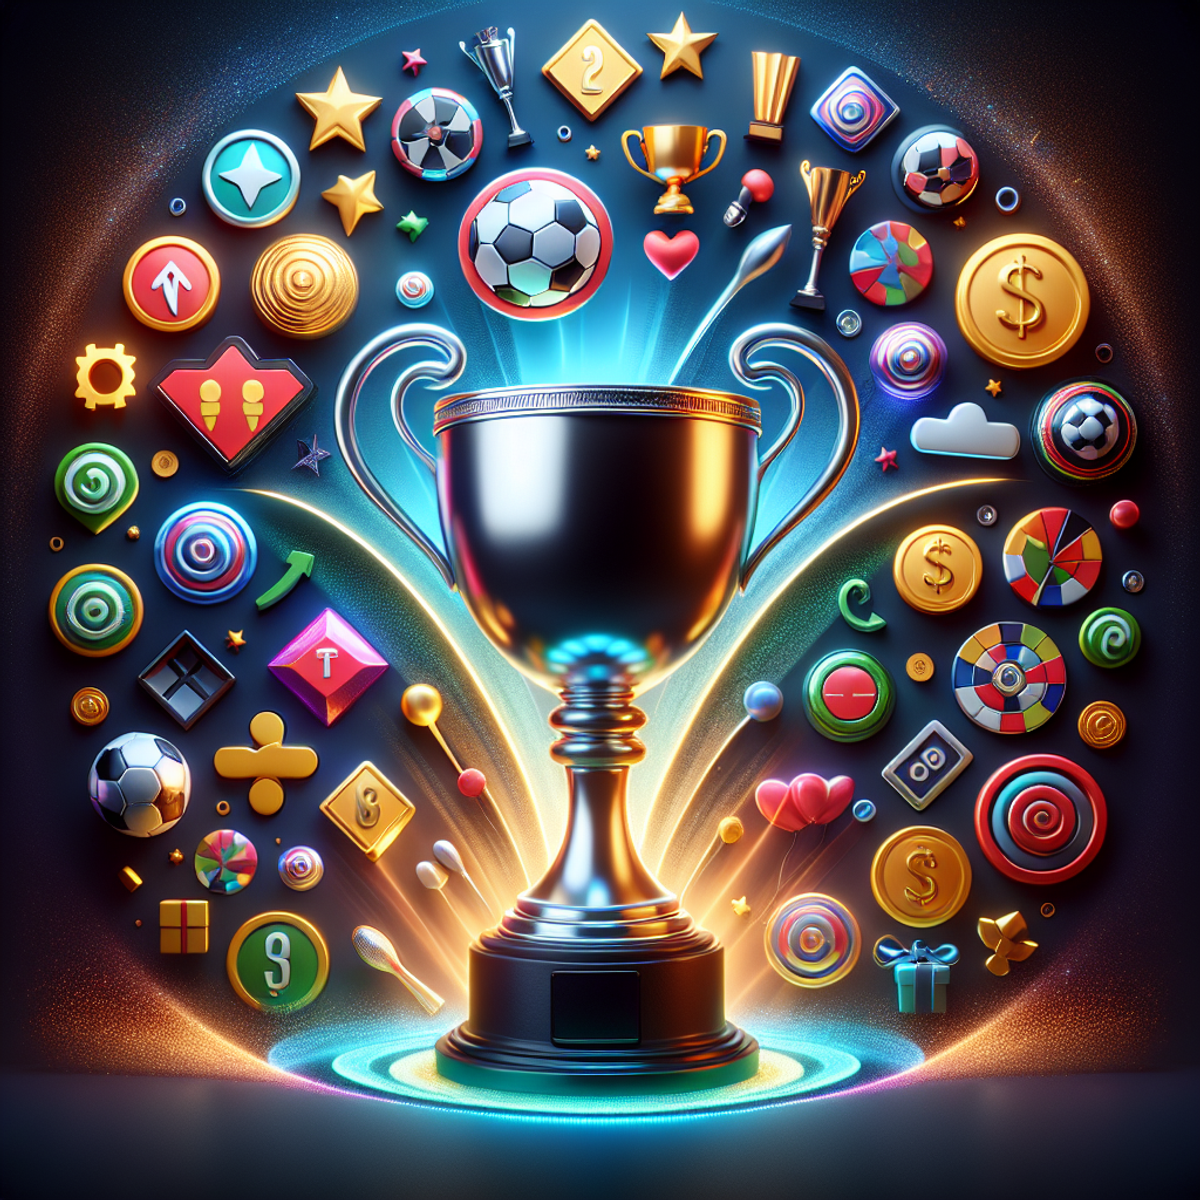 A gleaming trophy surrounded by bright, colorful symbols of bonuses and rewards.